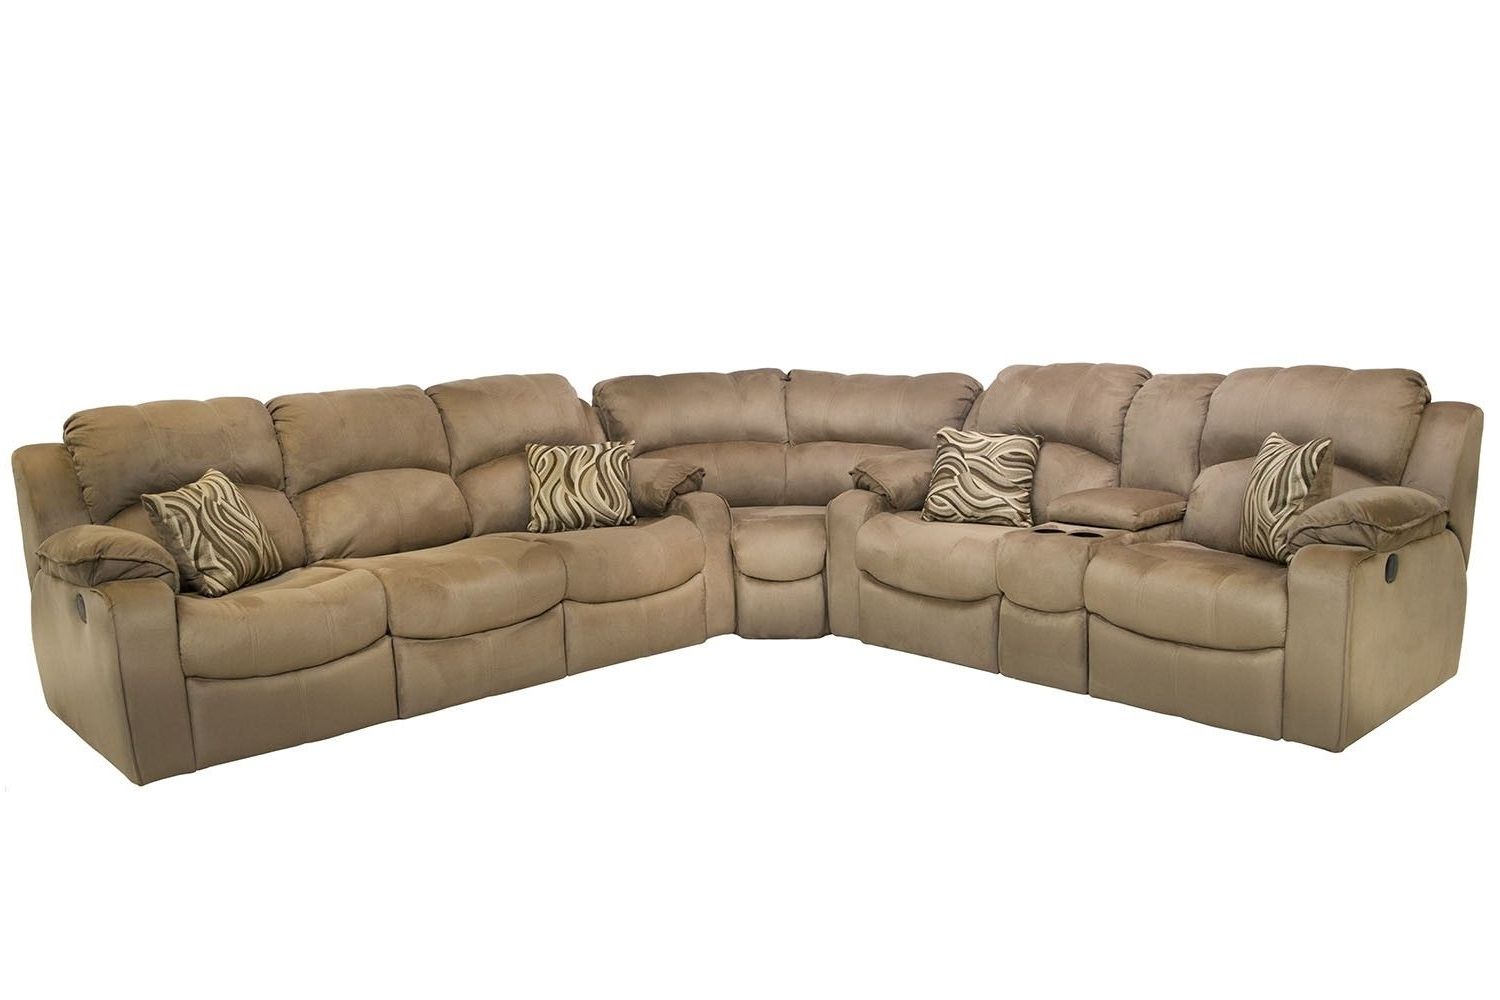 2019 Tornado Reclining Sofa & Power Reclining Console Loveseat Inside Sofas With Consoles (View 13 of 20)